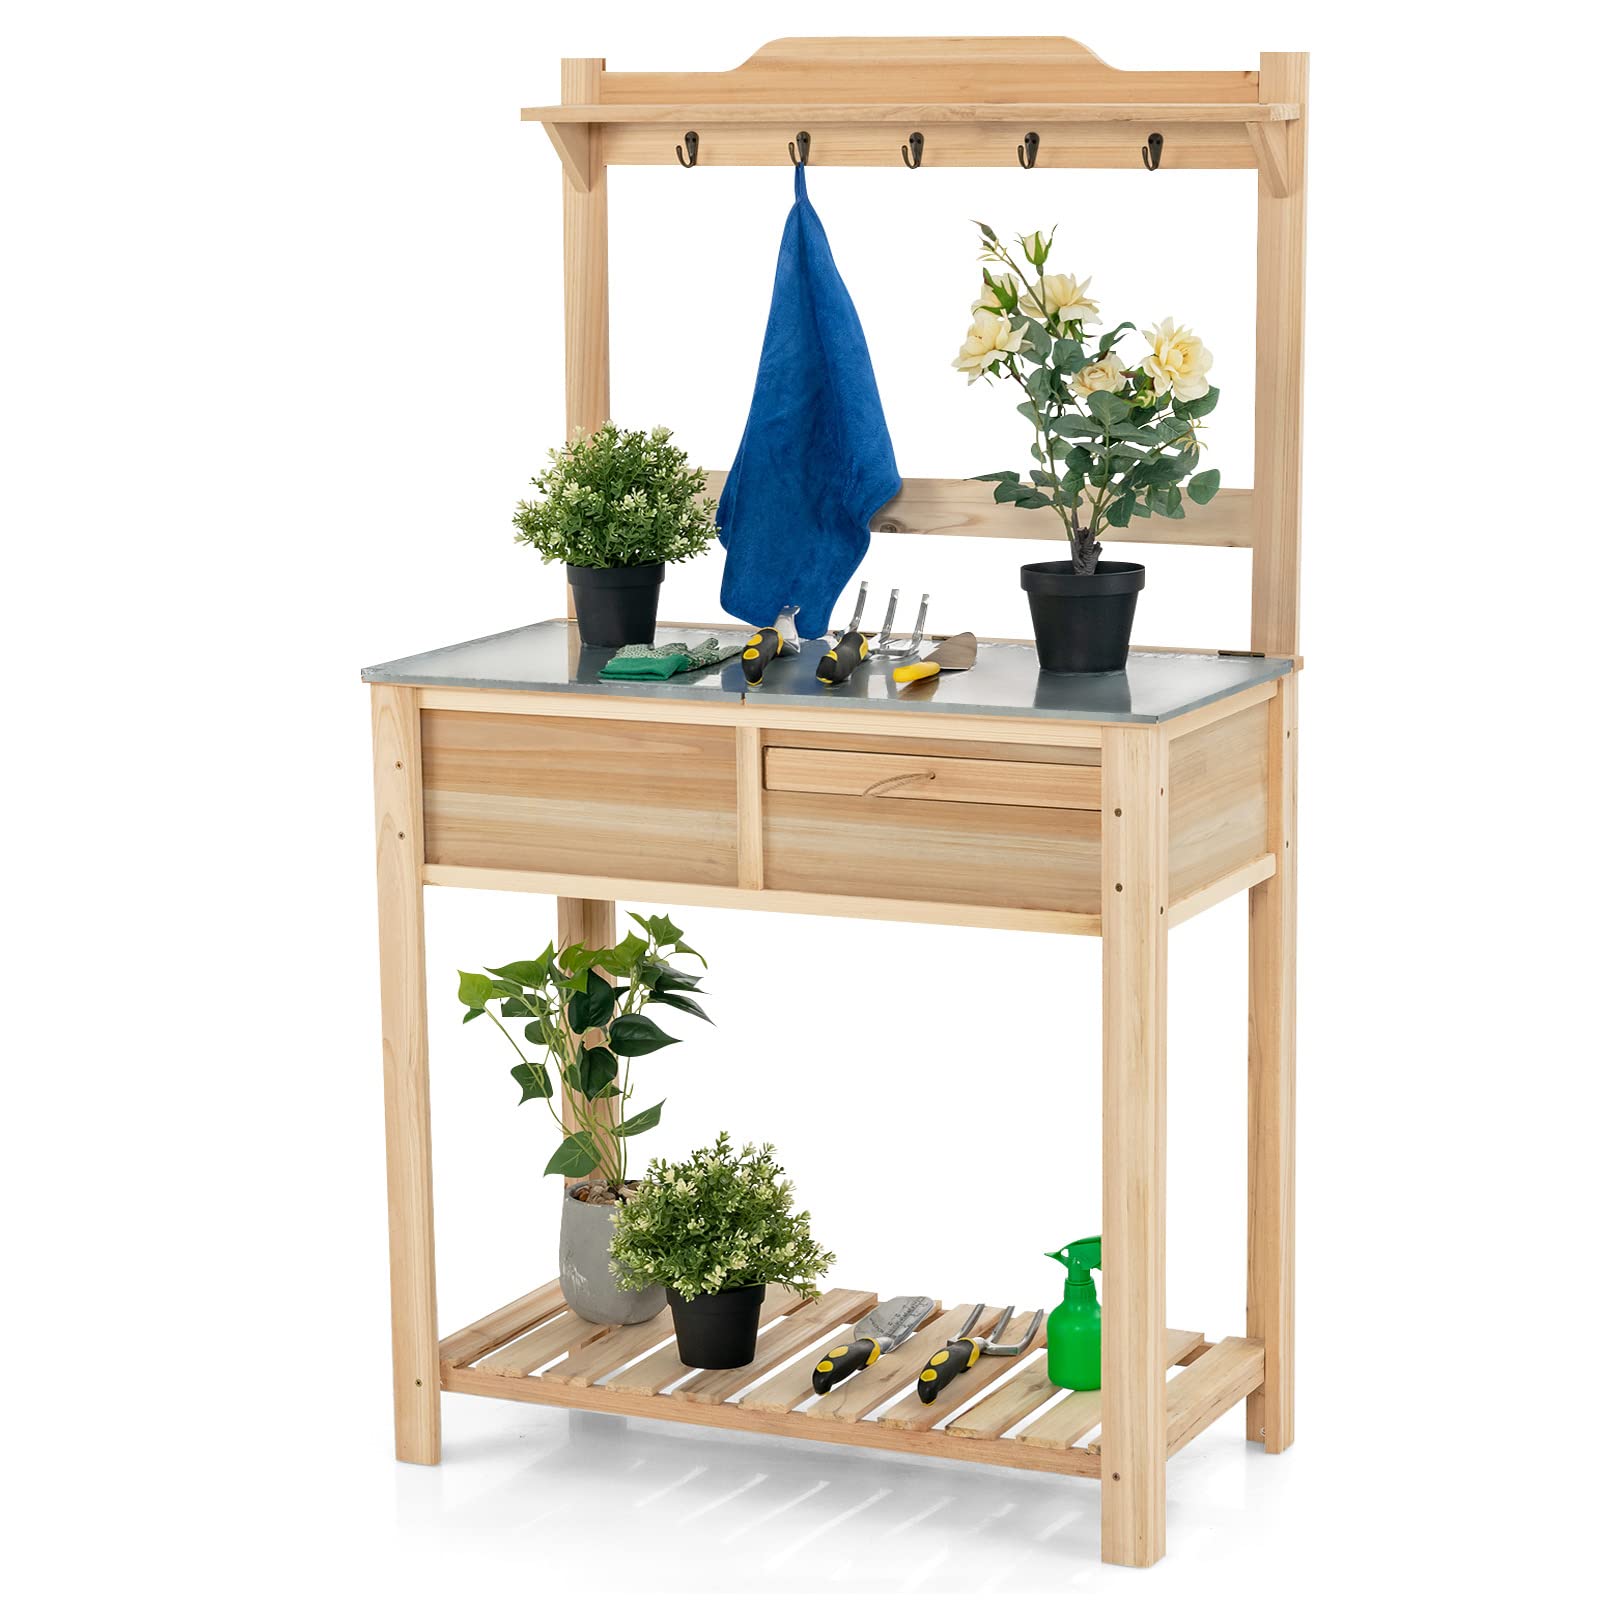 Giantex Potting Bench Outdoor Wooden Planting Table with Flip-Open Galvanized Metal Tabletop, Planting Box